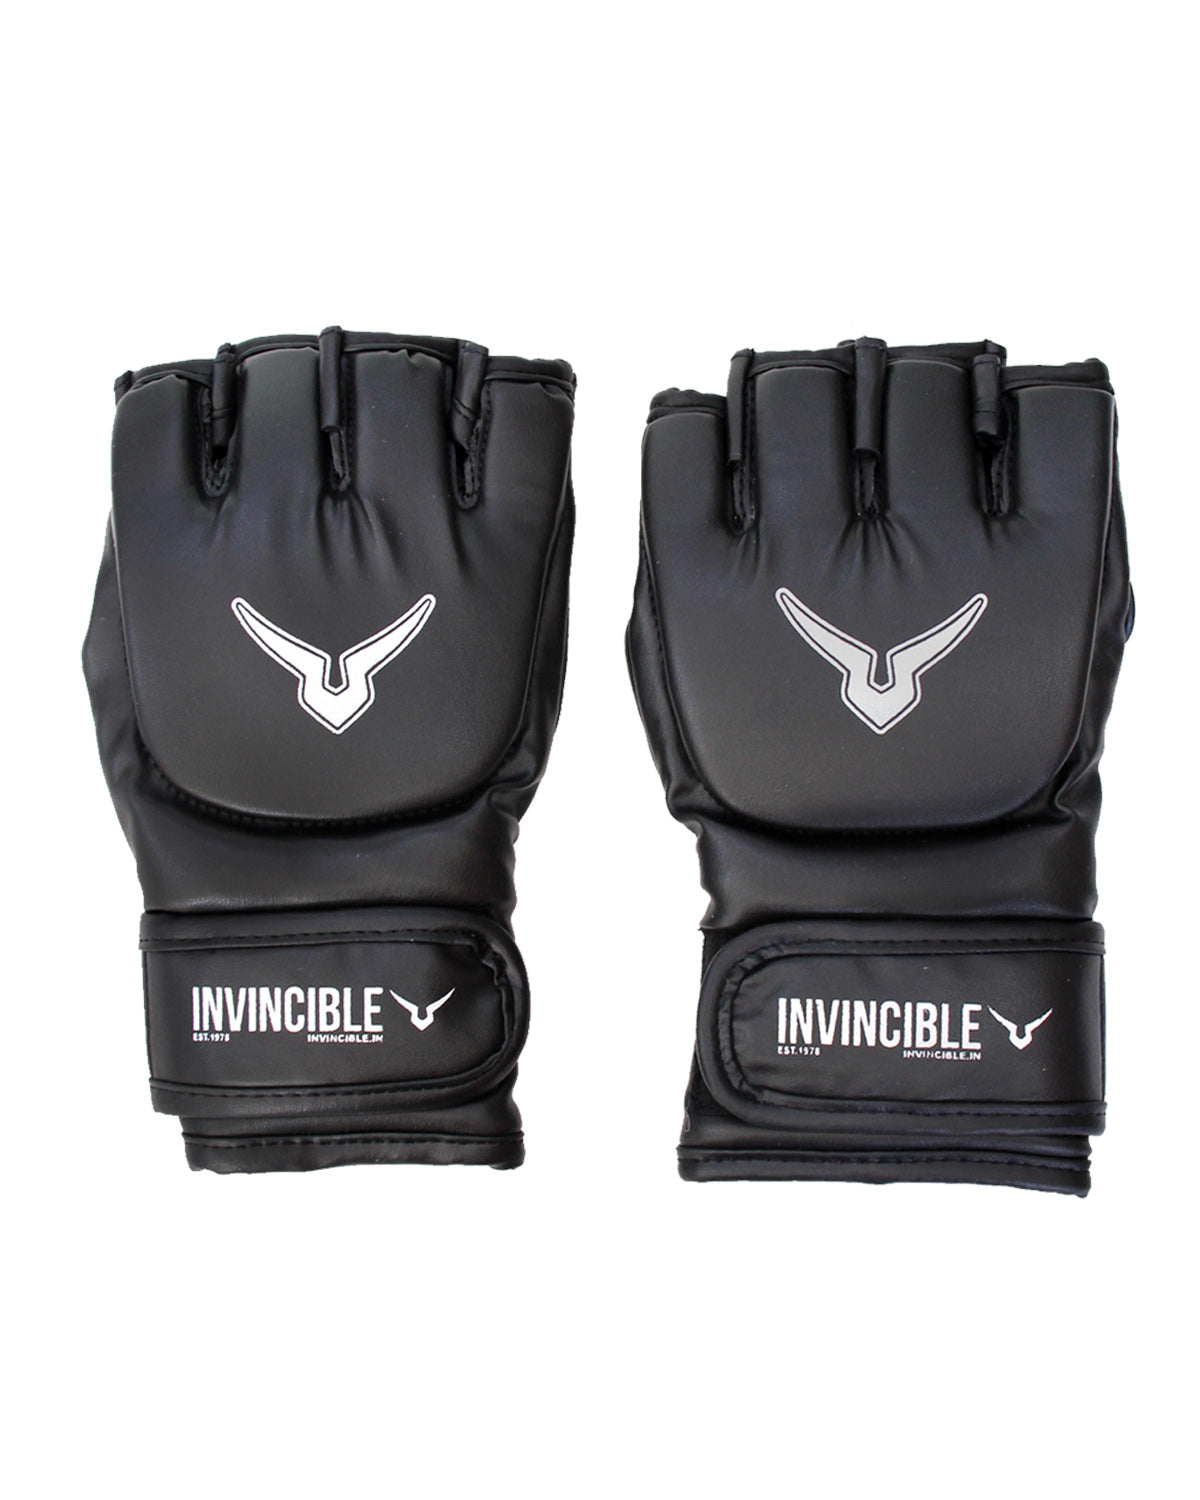 Invincible MMA Combat Gloves - Quality for Ultimate Performance in Mixed Martial Arts Fight